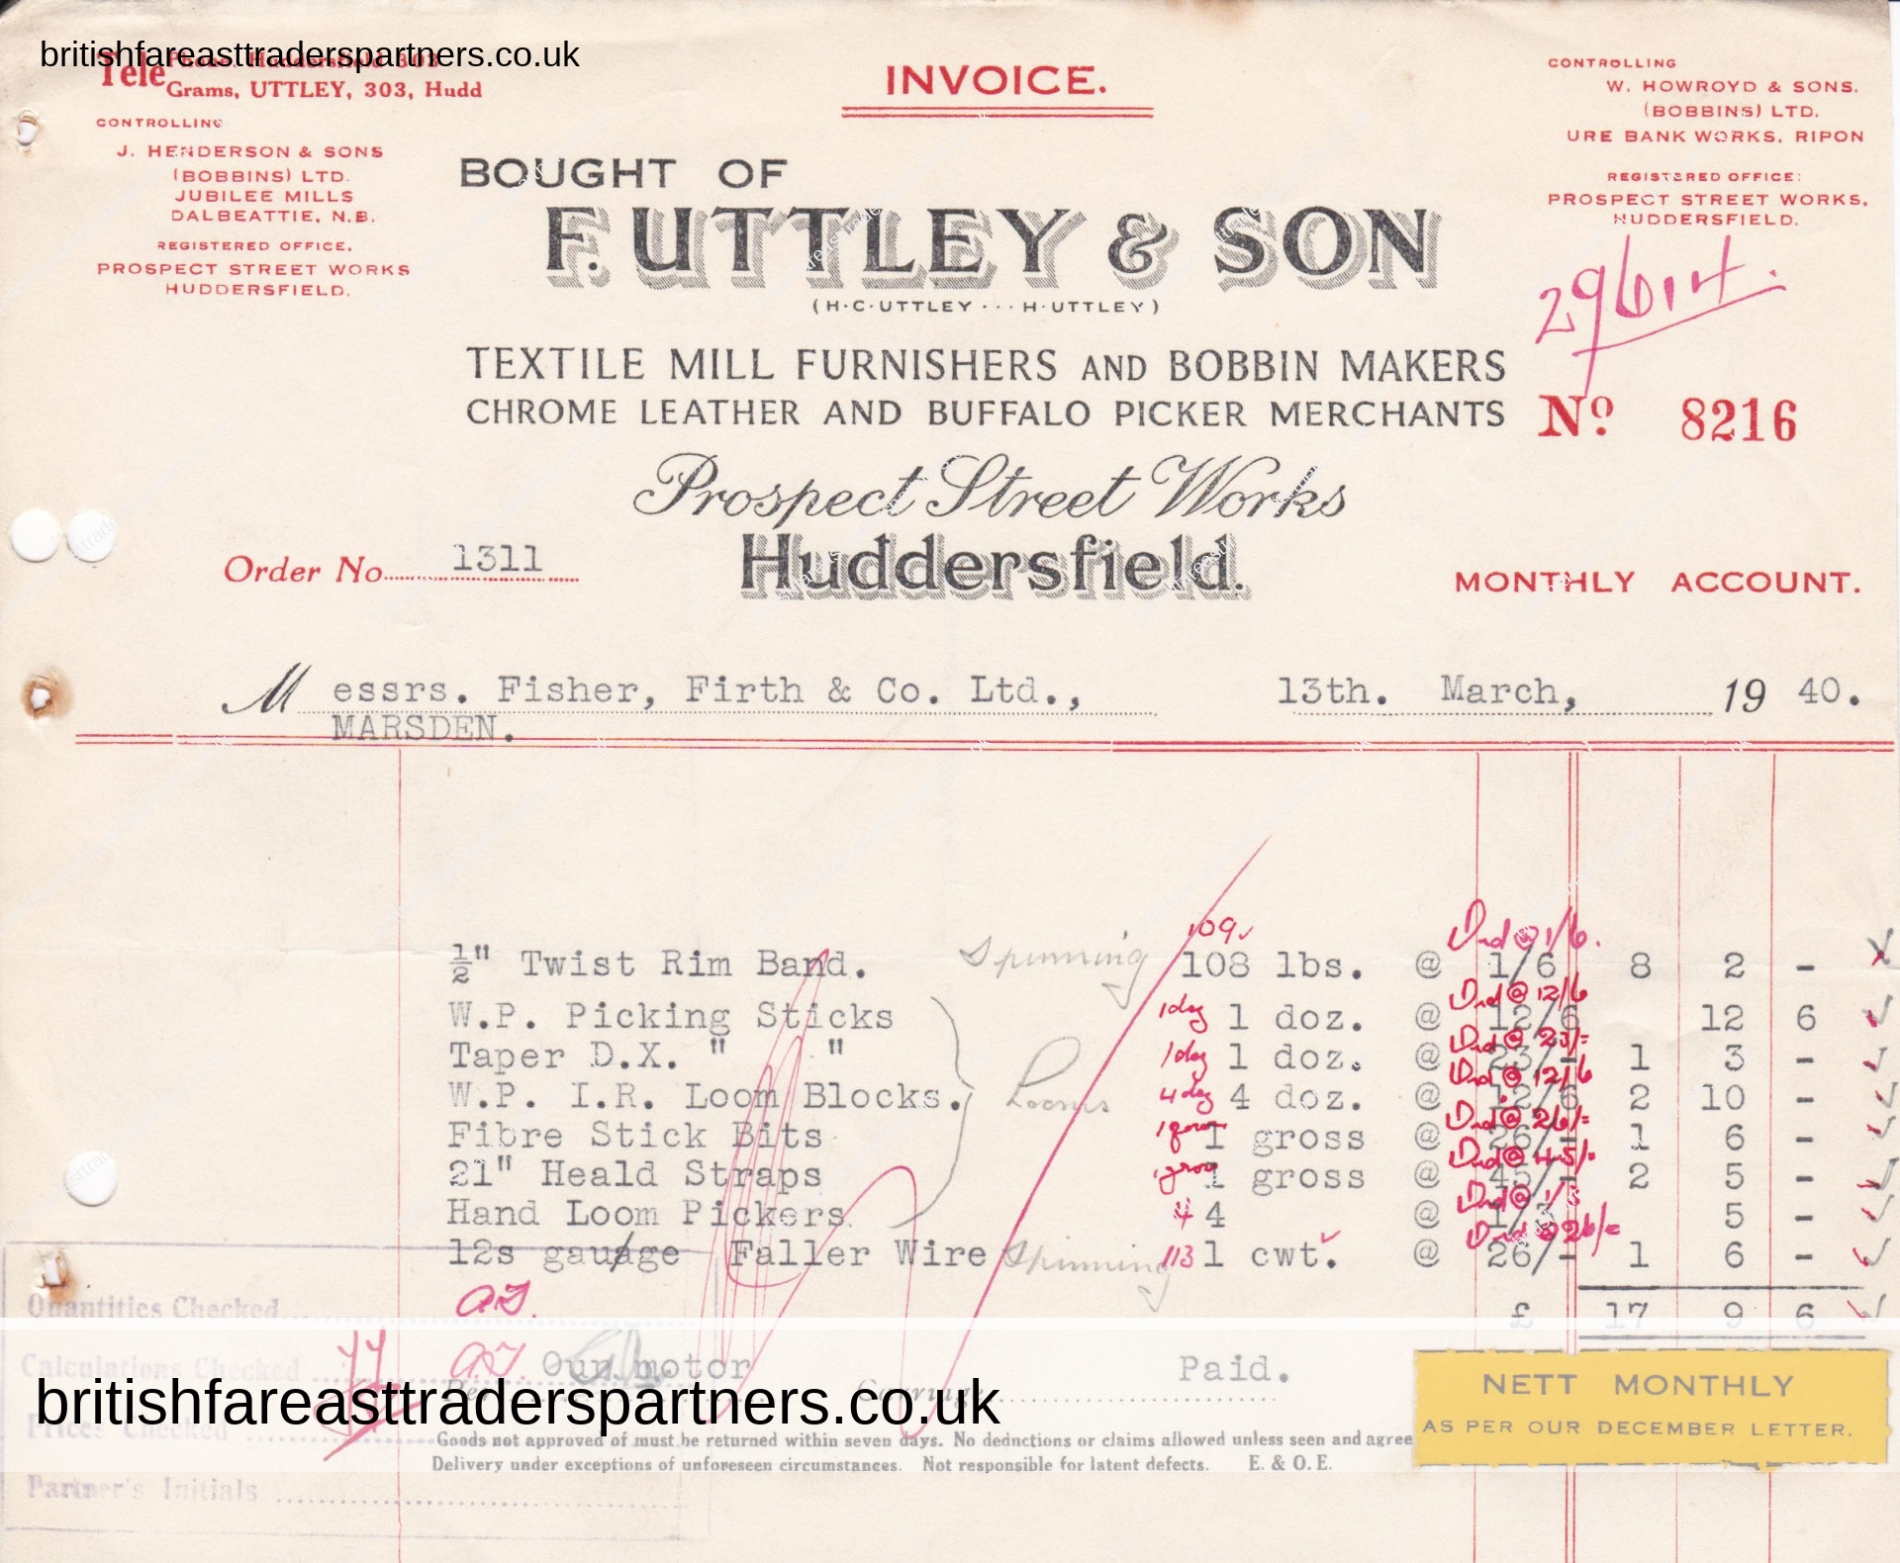 VINTAGE 1940 INVOICE / BILLHEAD F. UTTLEY & SON TEXTILE MILL FURNISHERS AND BOBBIN MAKERS CHROME LEATHER AND BUFFALO PICKER MERCHANTS COLLECTABLES | PAPER & EPHEMERA BUSINESS | COMPANIES |  INVESTMENTS | INDUSTRIES | HERITAGE | HISTORY